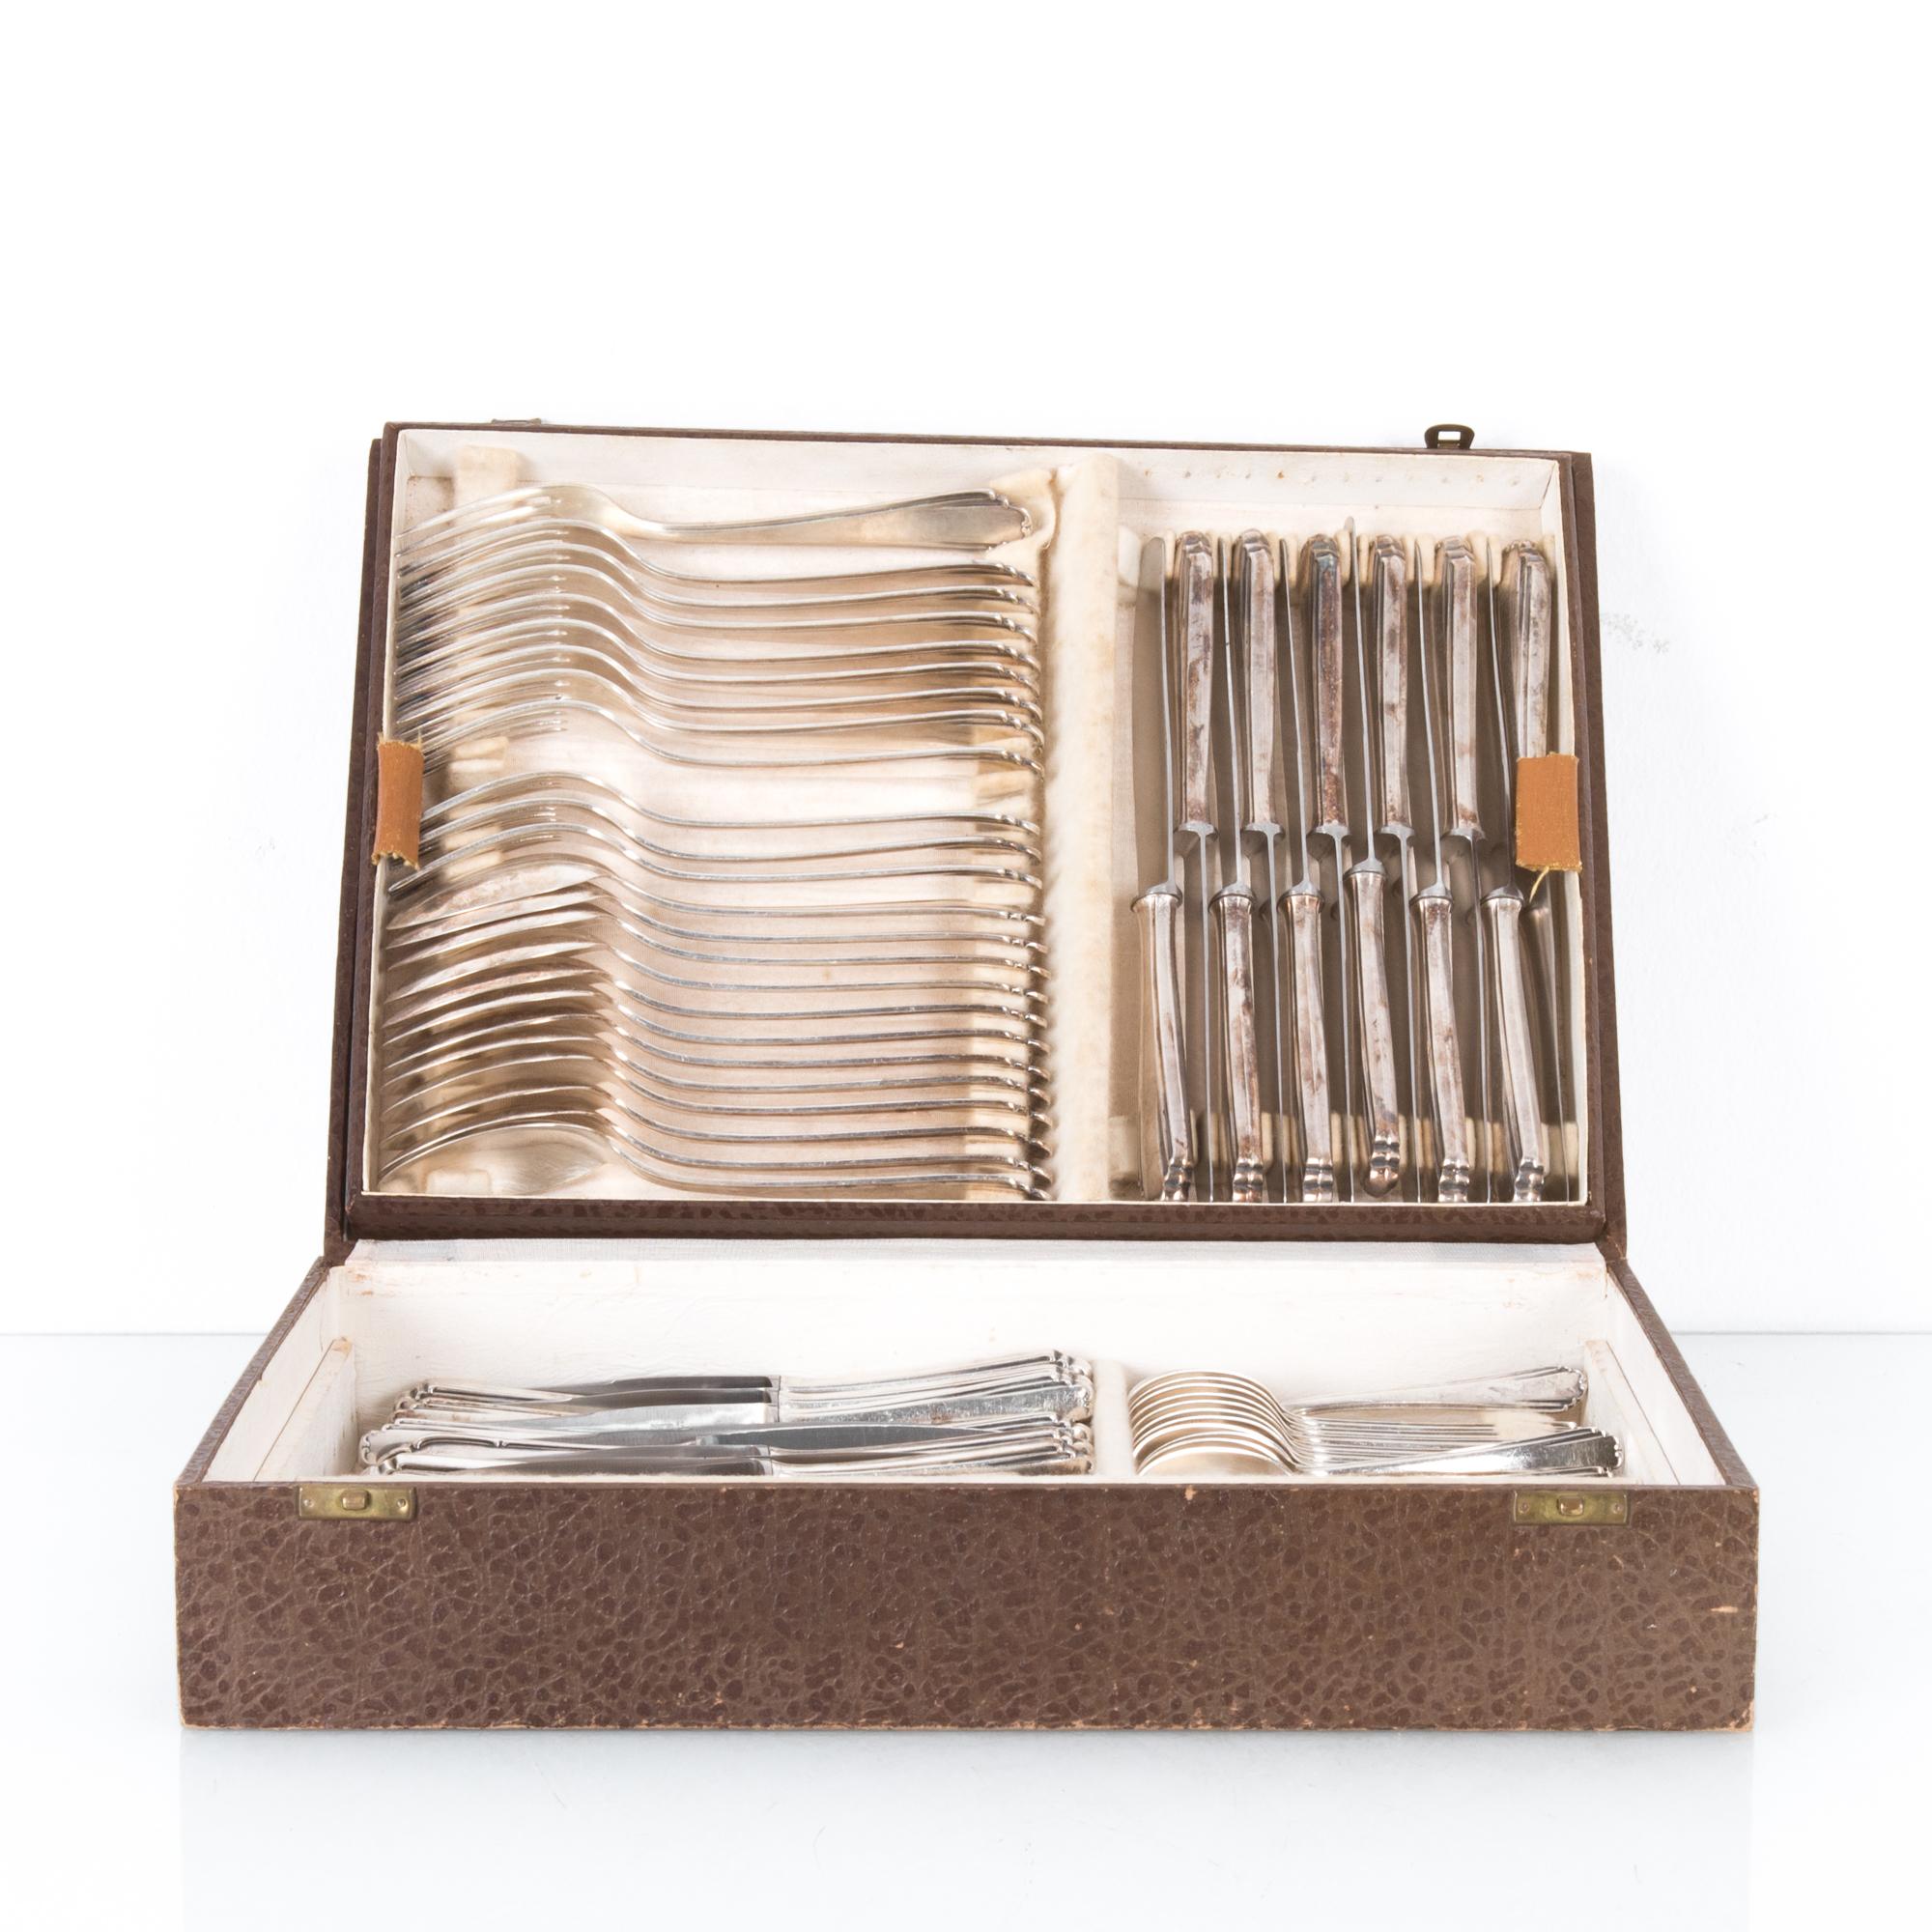 This set of silver plated cutlery was made in Belgium, circa 1900. The hinged, gray box opens to reveal an interior with four compartments and an additional two compartments in the lid. This 85-piece cutlery canteen will cater for a party of 12.